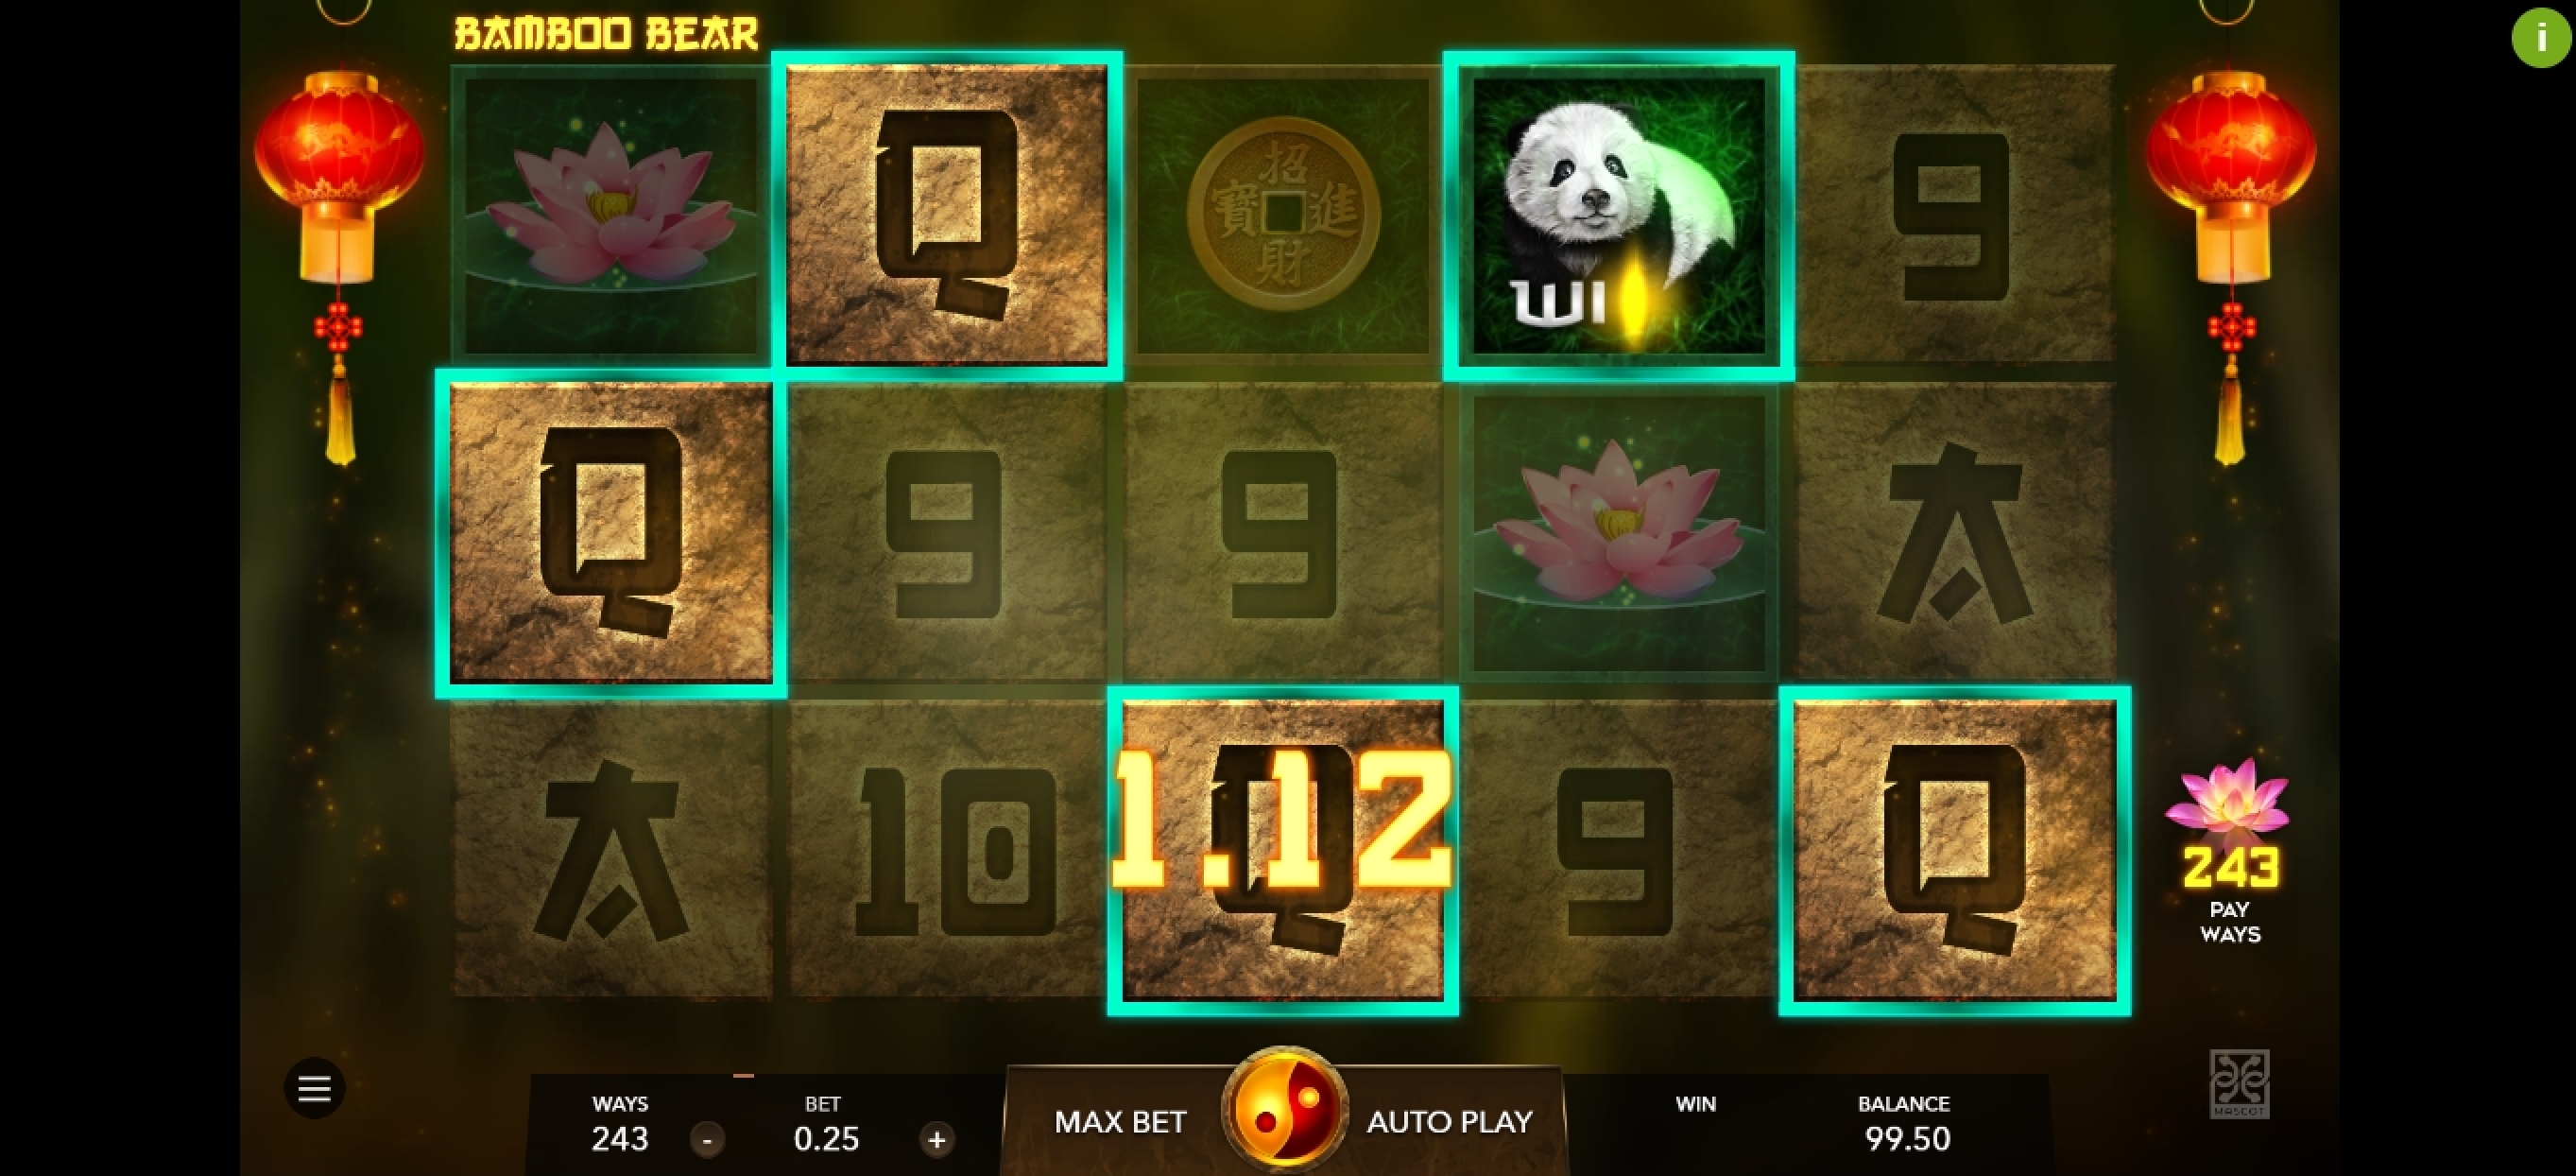 Win Money in Bamboo Bear Free Slot Game by Mascot Gaming